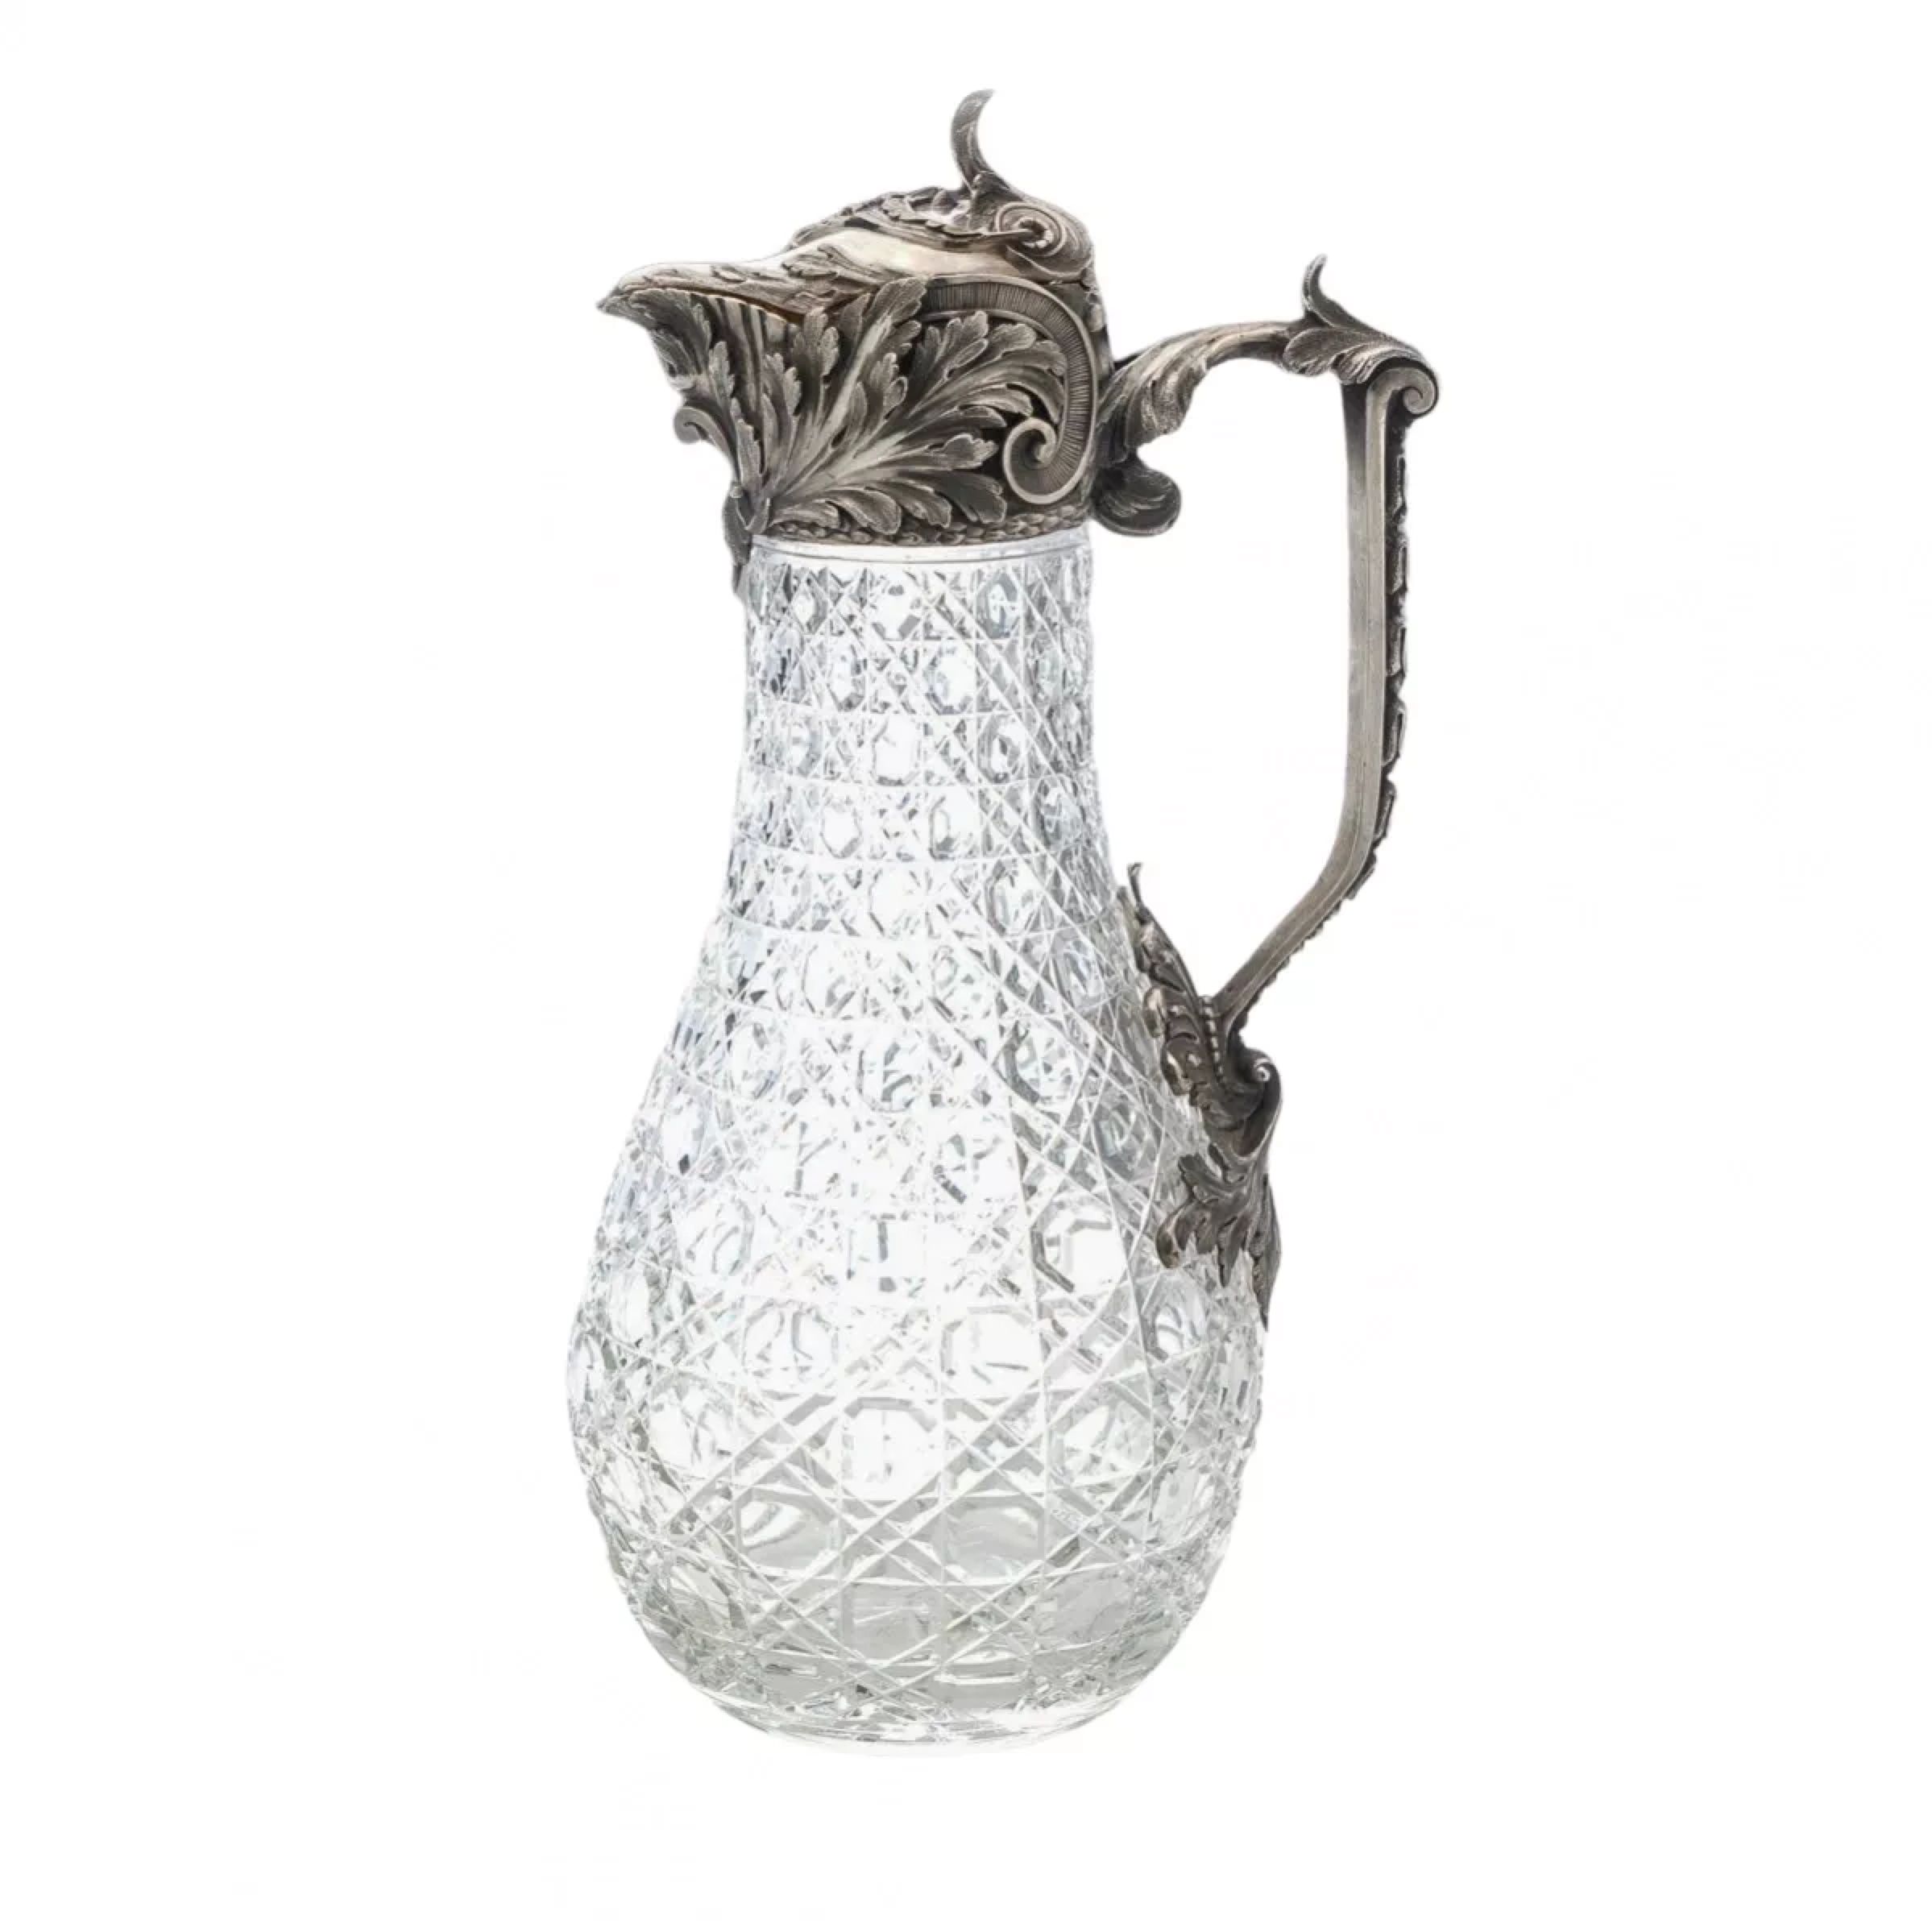 Russian-crystal-wine-jug-in-silver-by-Bolin-Karl-Linke-Moscow-Early-20th-century-